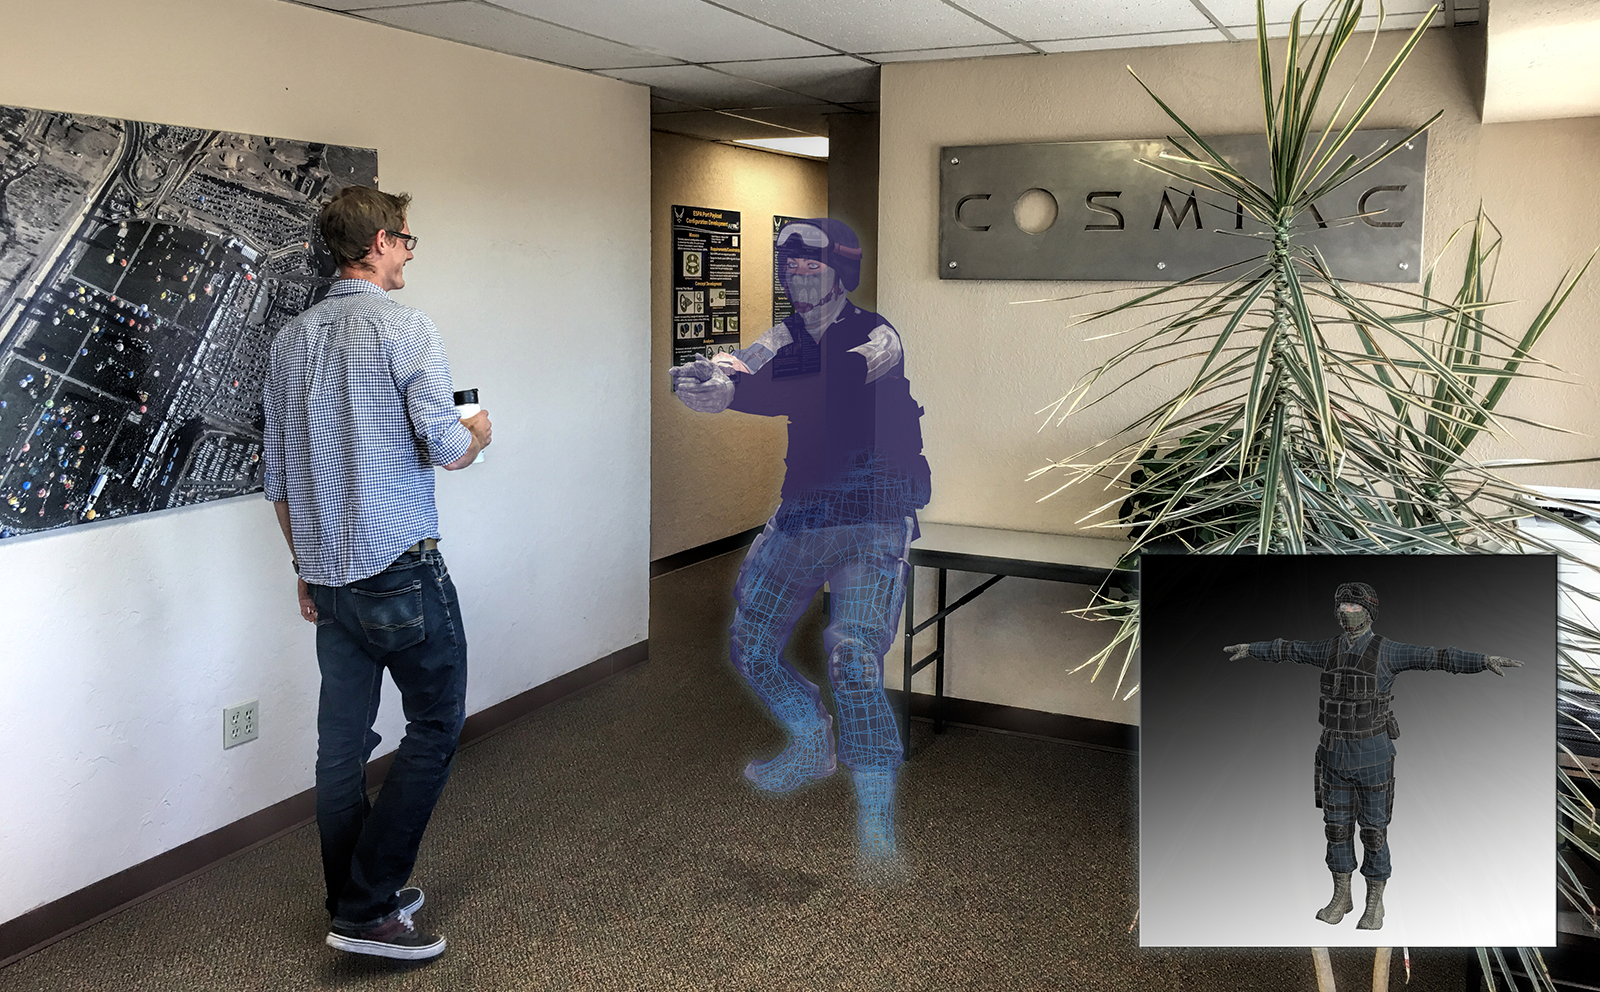 image virtual reality in the cosmiac office